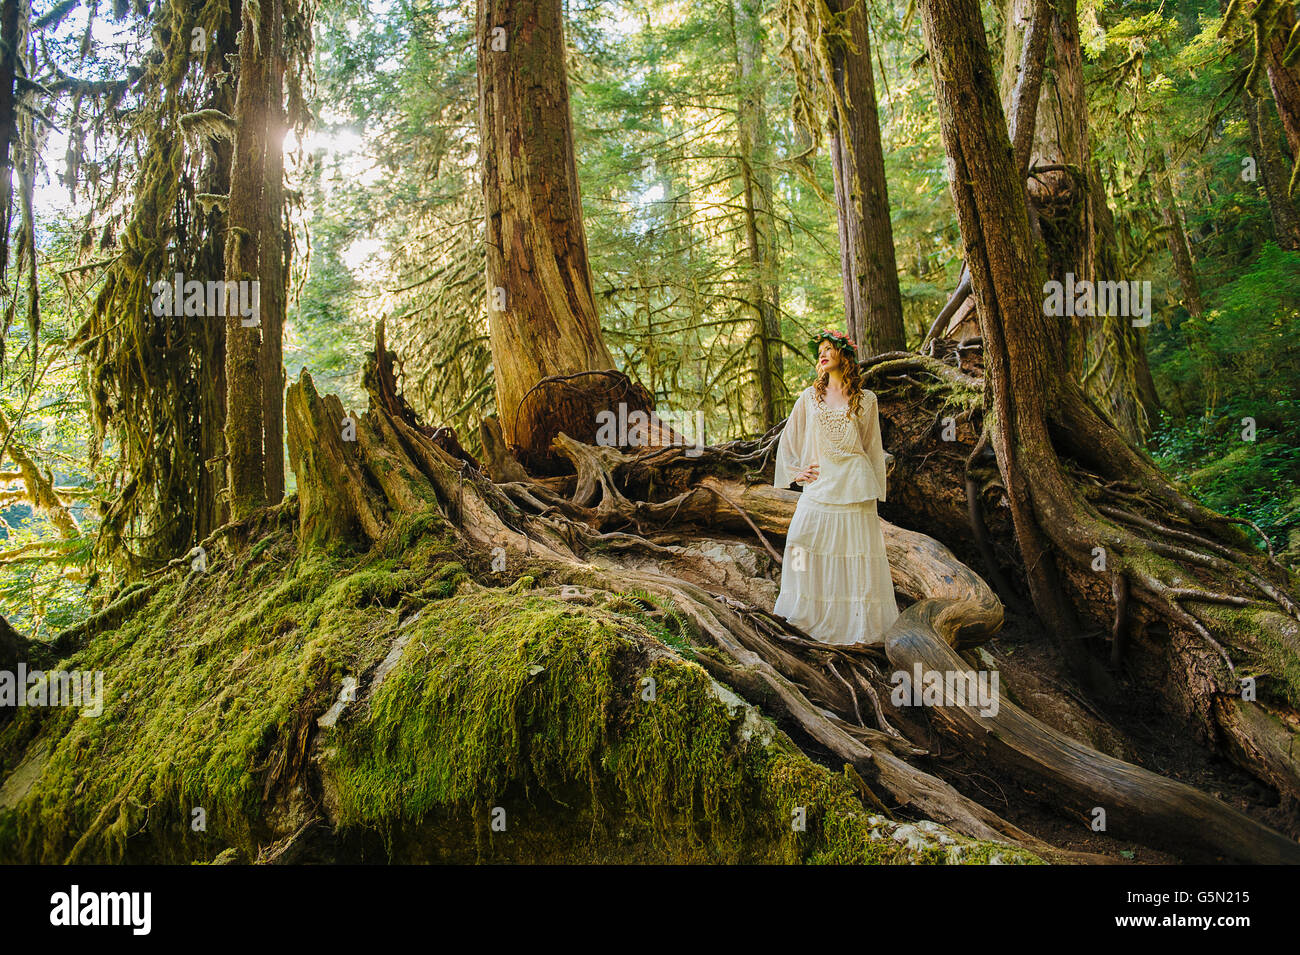 Caucasian woman standing on root in forest Stock Photo